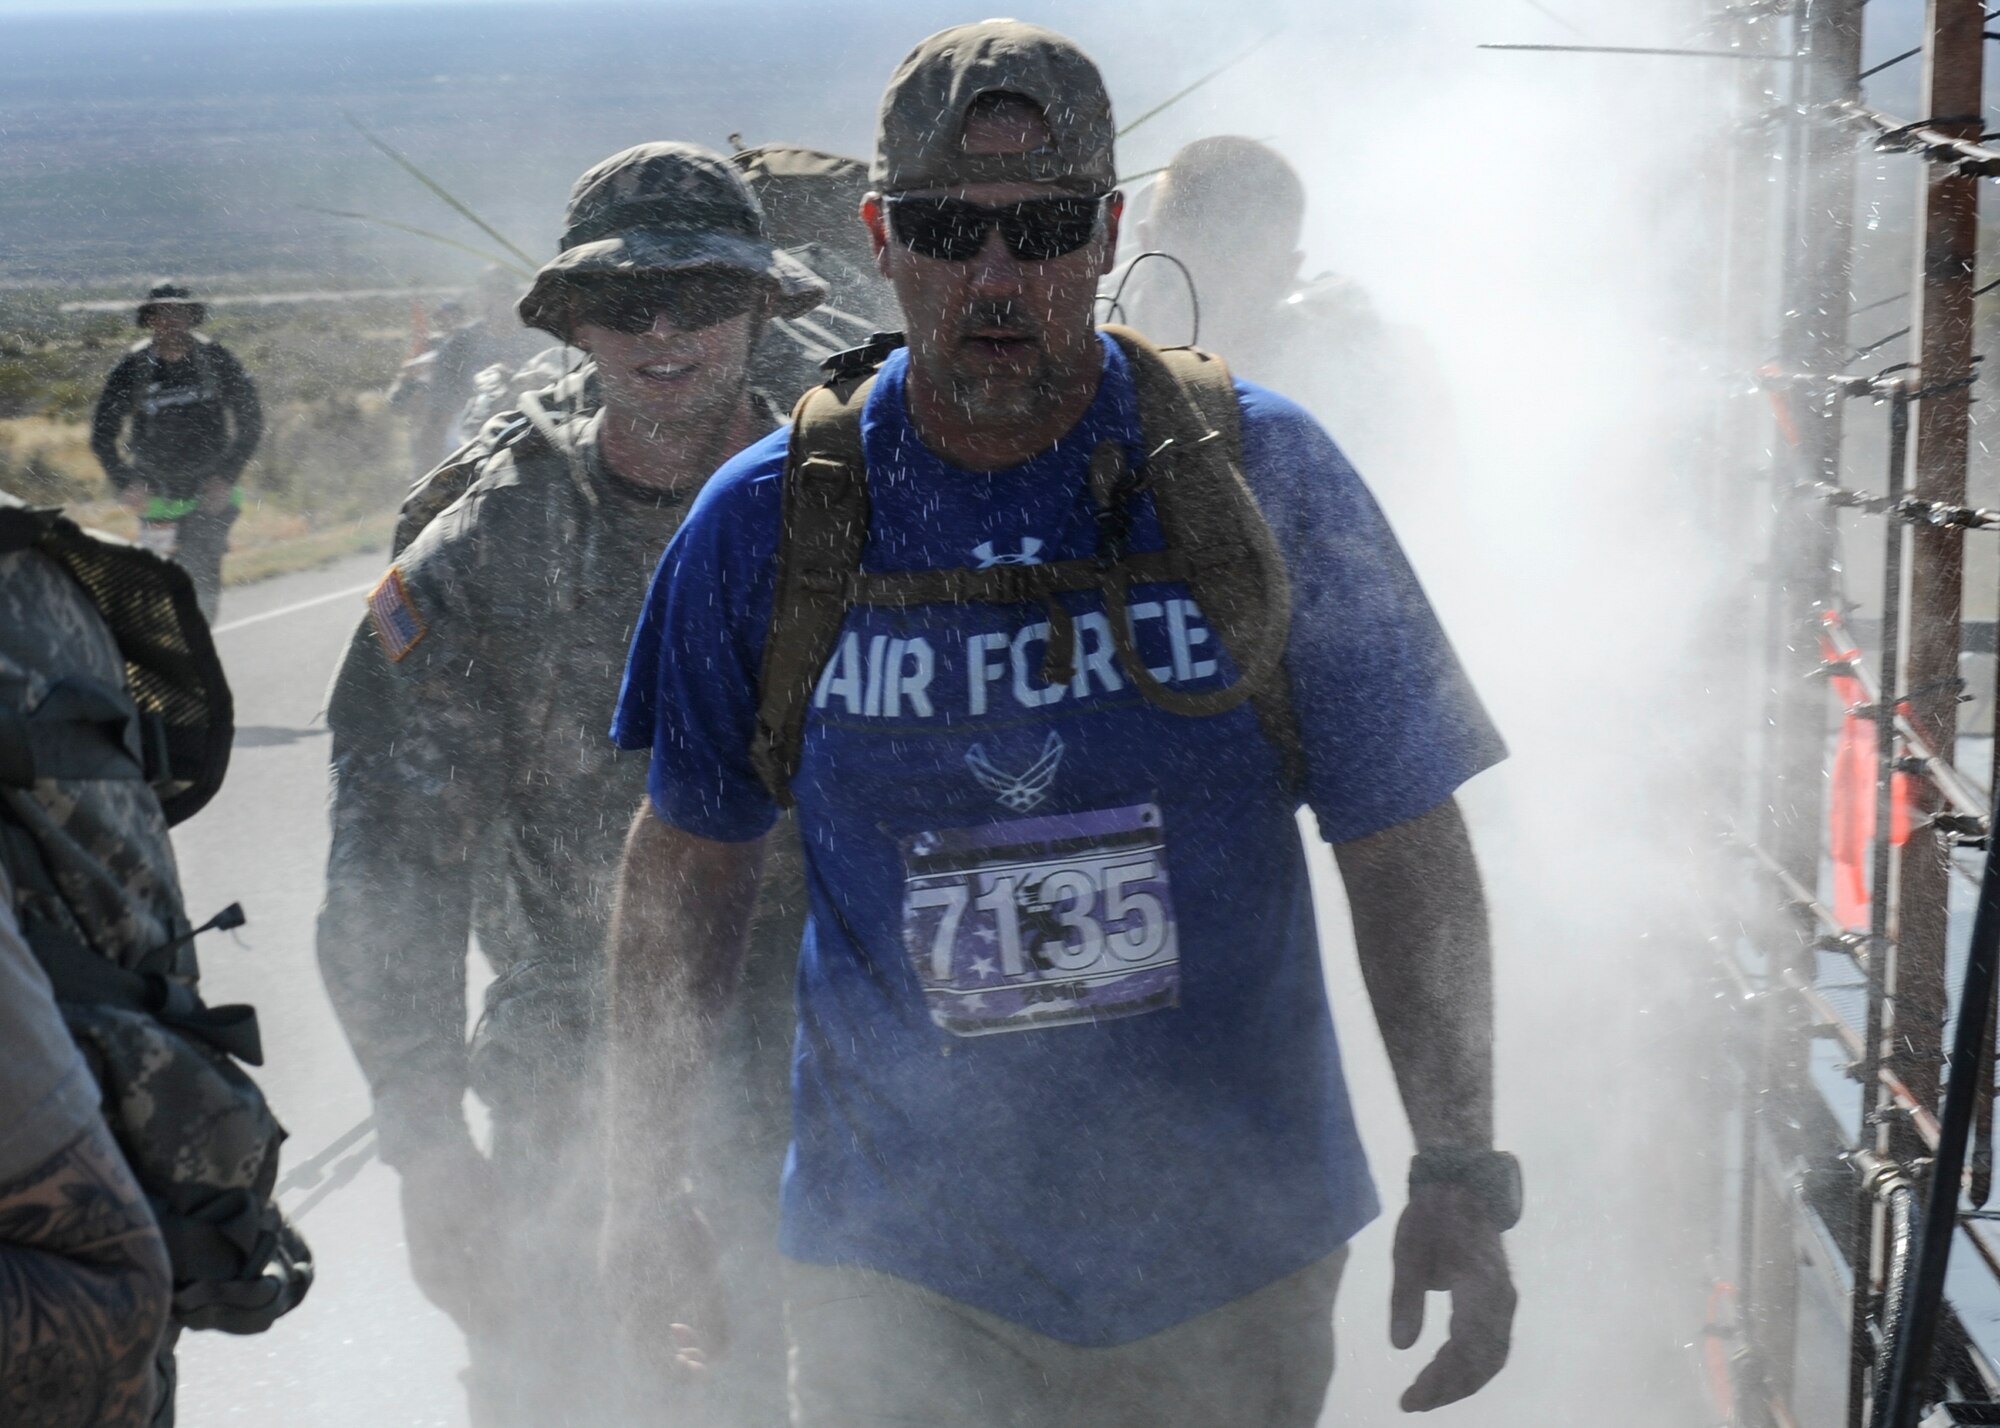 Kenneth Womack, 19th Logistics Readiness Squadron aerial delivery rigger supervisor, passes through a water mist machine along the 26.2 trek of the 2016 Bataan Death March at White Sands Missile Range, N.M., March 20, 2016. The march honors U.S. and Filipino prisoners of war during the notorious Bataan Death March of World War II. Historians estimate the death toll neared 10,000. (U.S. Air Force photo by Senior Airman Harry Brexel)